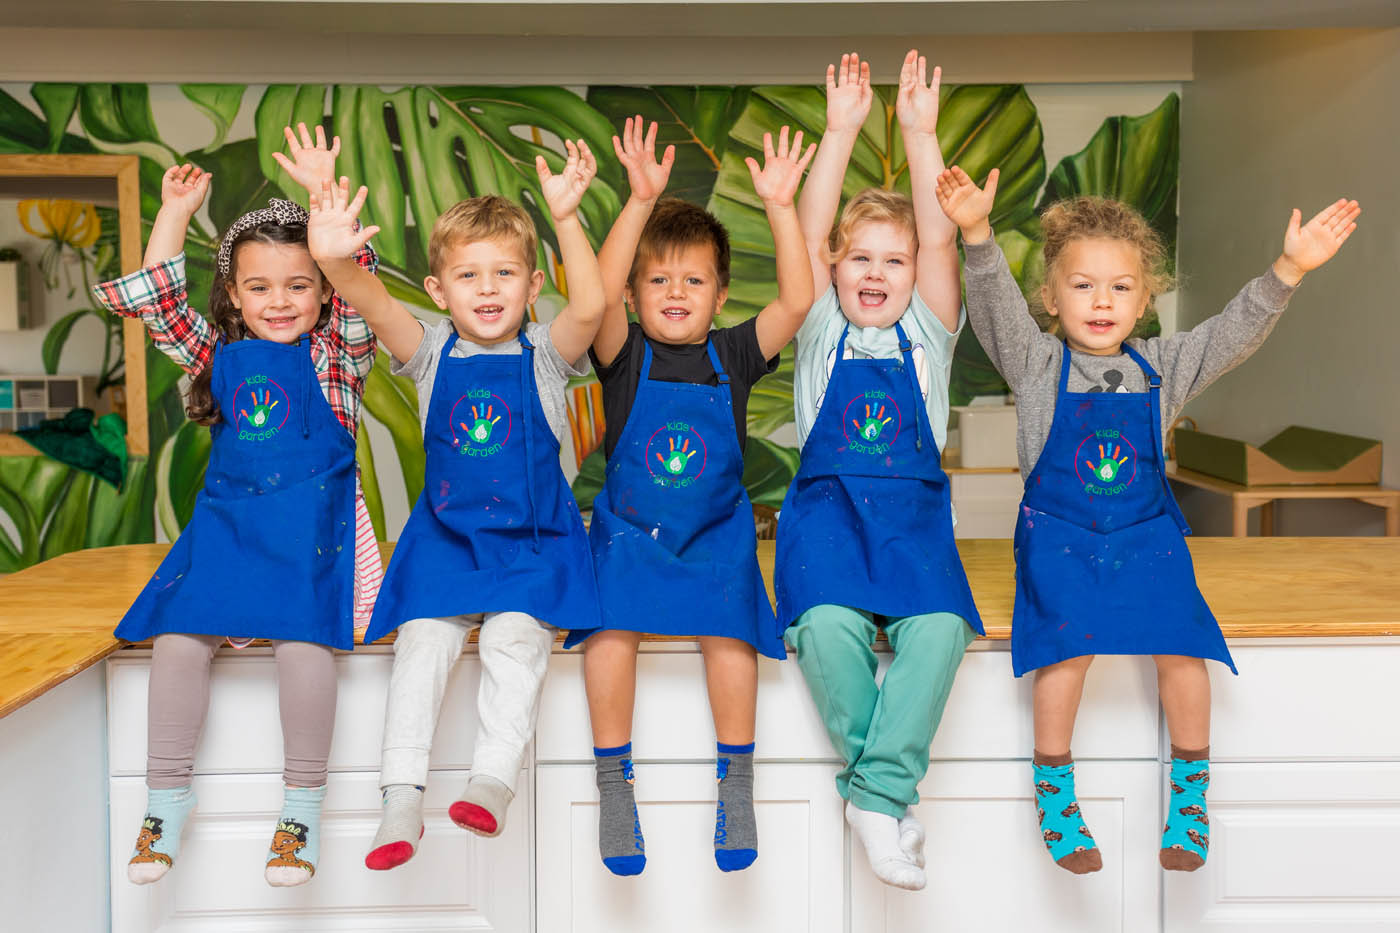 Kids in blue aprons at Kids Garden Mt. Pleasant learning center.